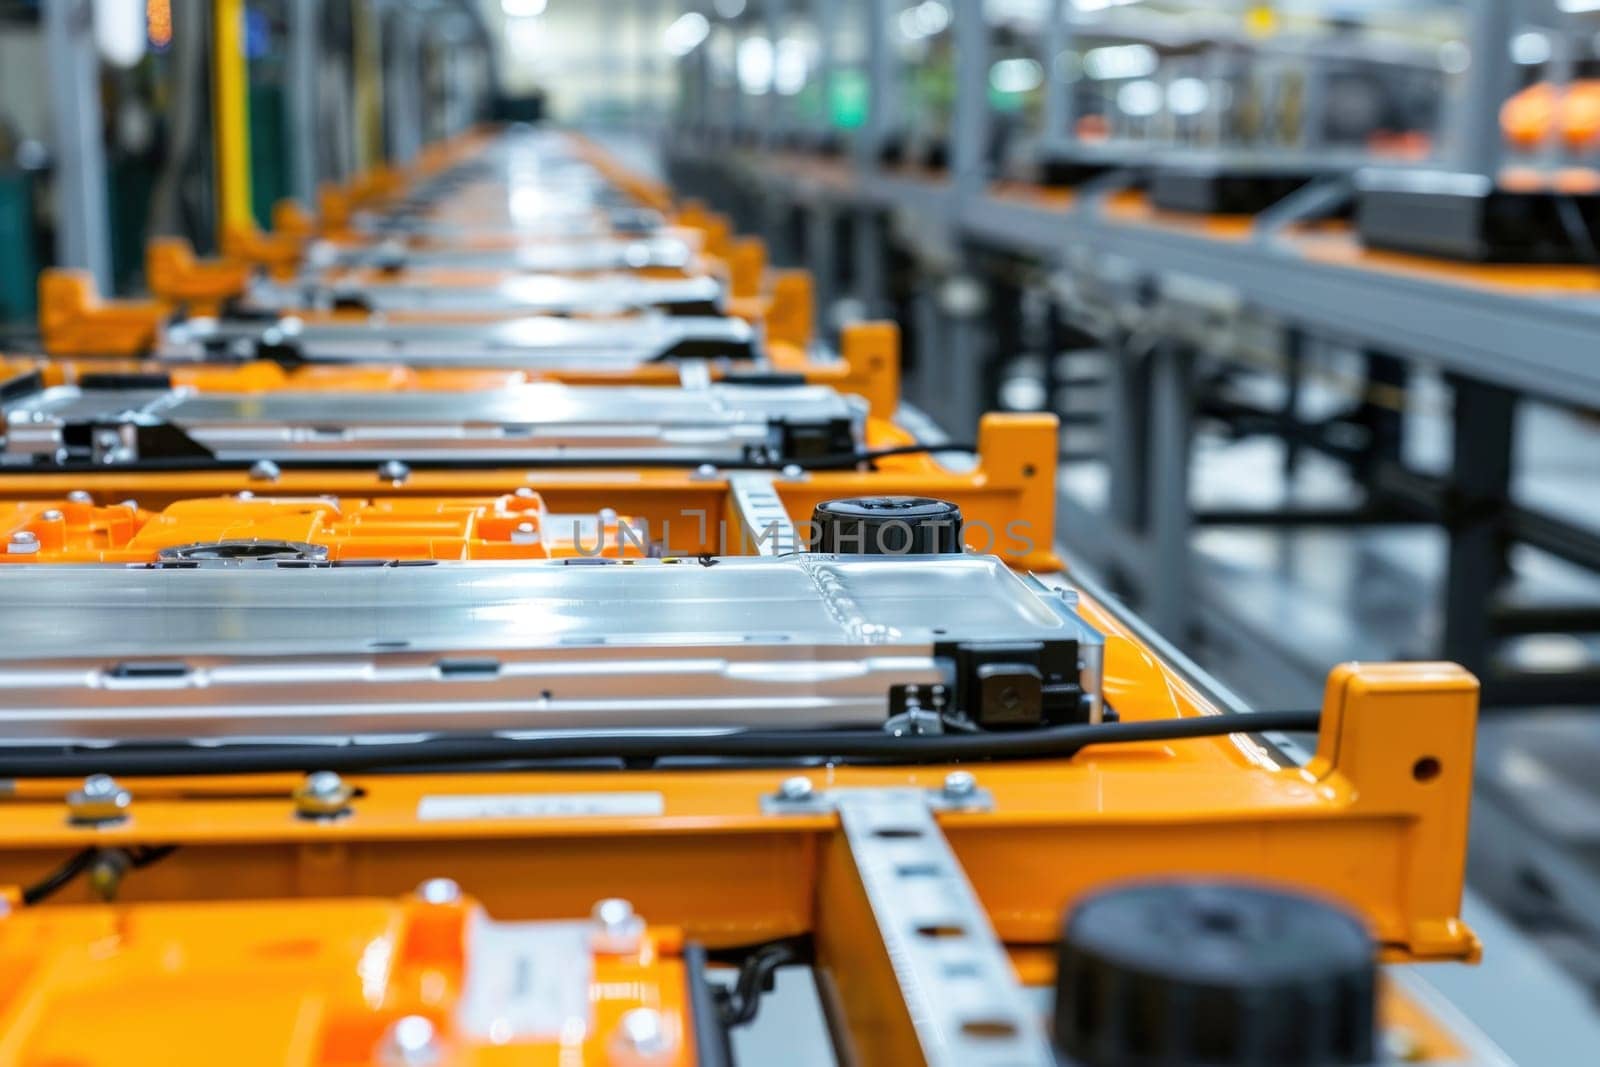 Mass production assembly line of electric vehicle battery cells.